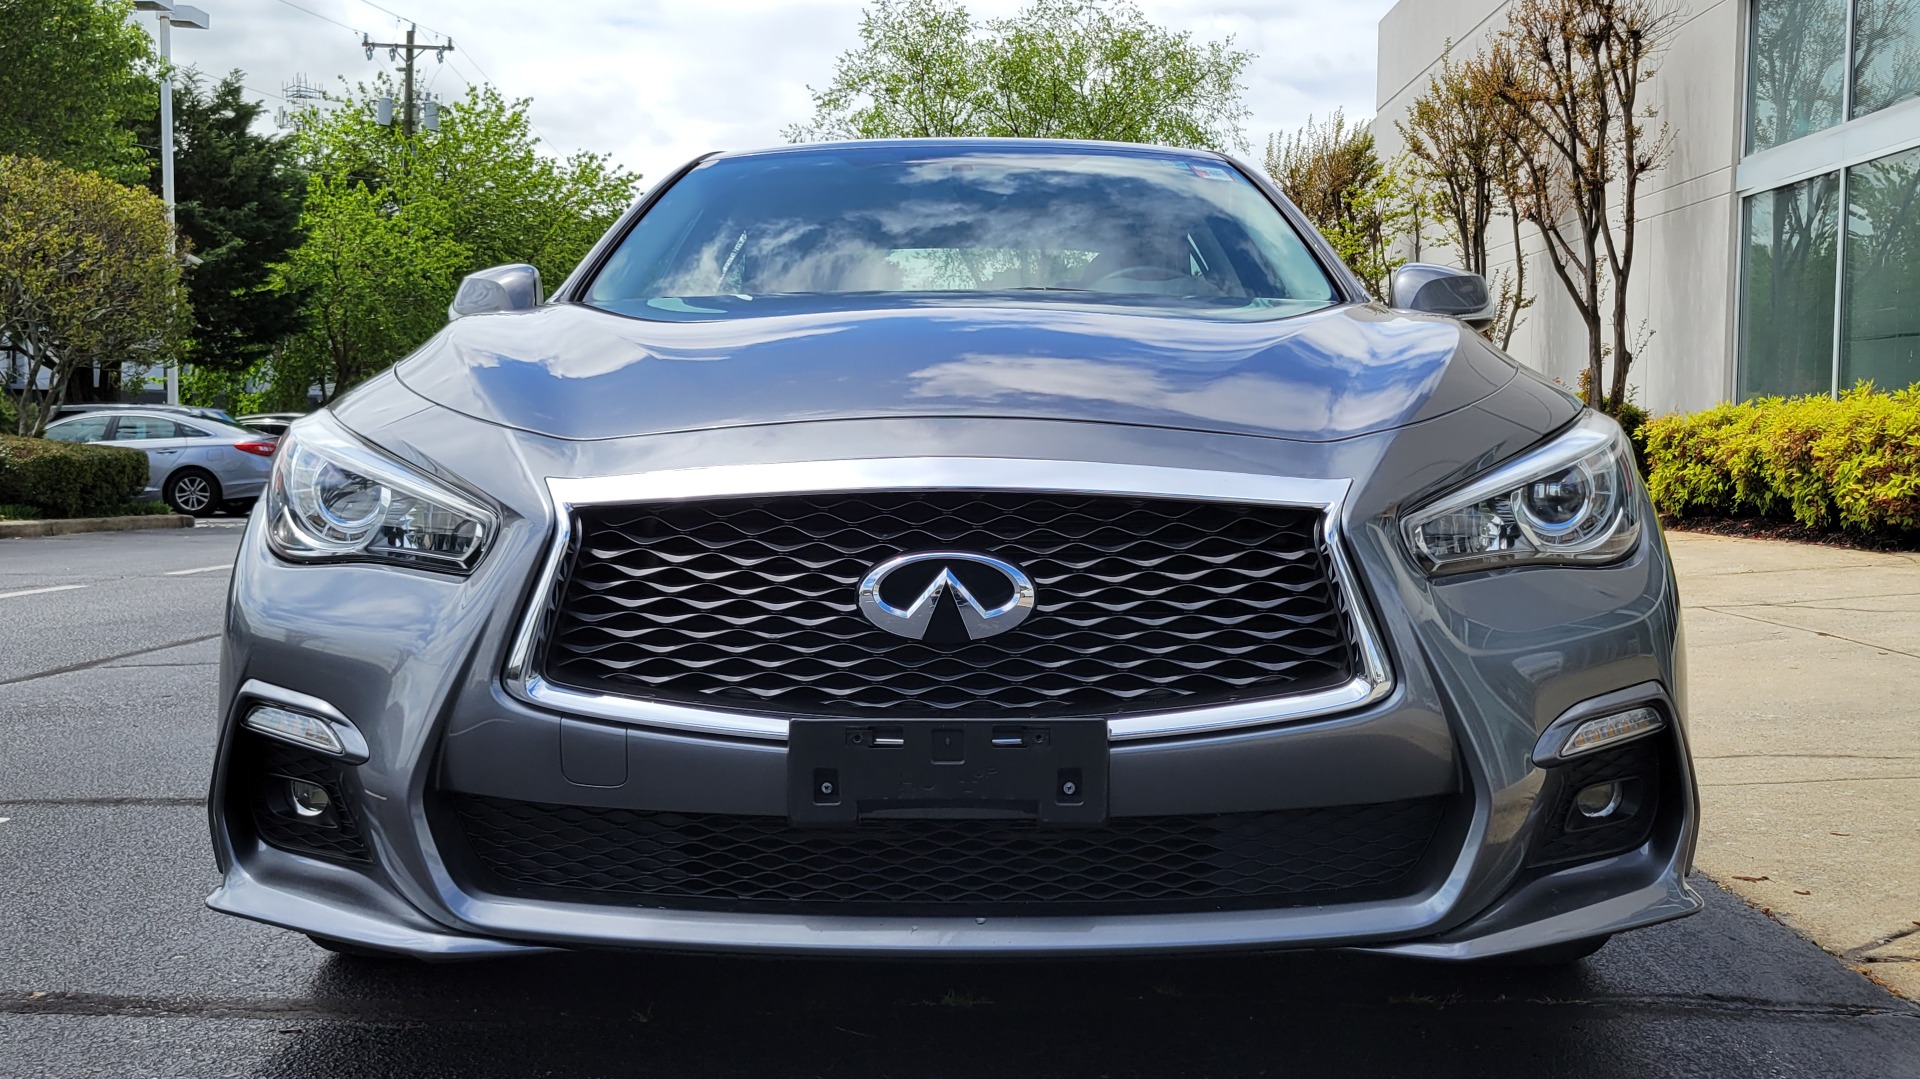 Used 2018 INFINITI Q50 3.0T SPORT AWD / ESSENTIALS / NAV / SUNROOF / HTD STS / REARVIEW for sale $32,995 at Formula Imports in Charlotte NC 28227 77